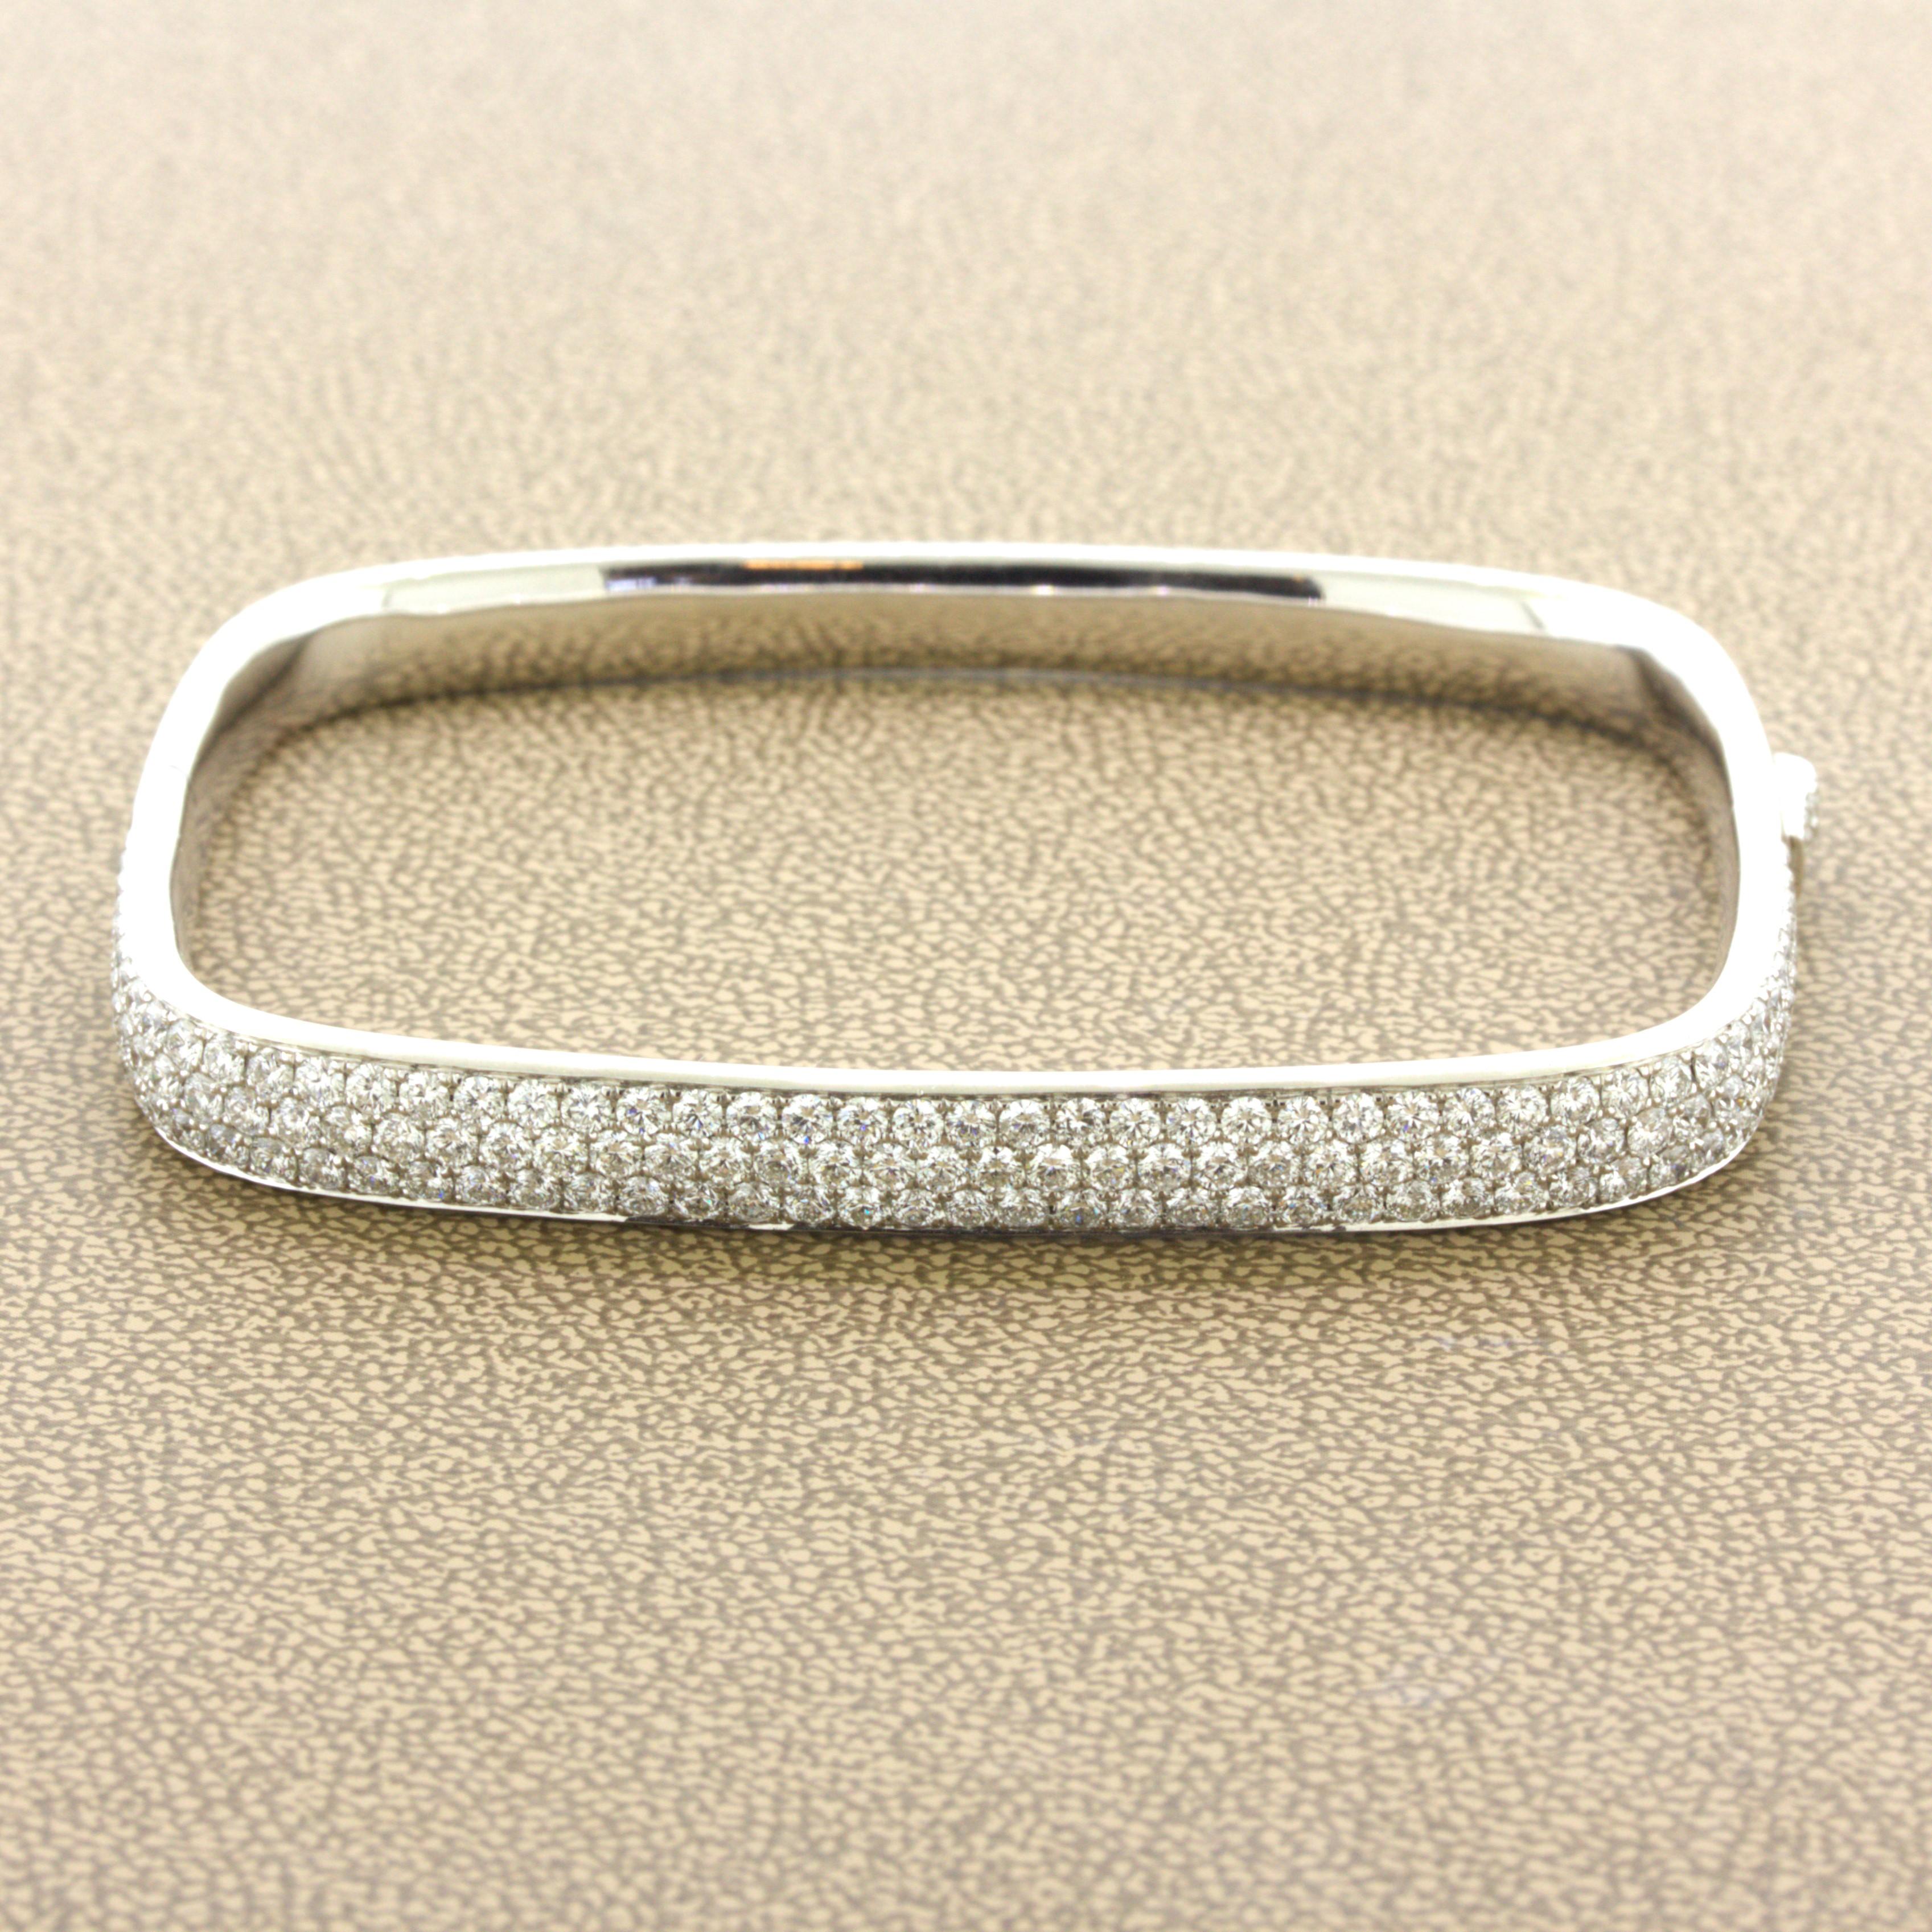 A chic and elegant diamond pave bangle with a modern design. While most bangles are rounded this piece is more squarish in shape with rounded corners. It features 3.85 carats of bright white VS quality diamonds pave-set over the top half of the